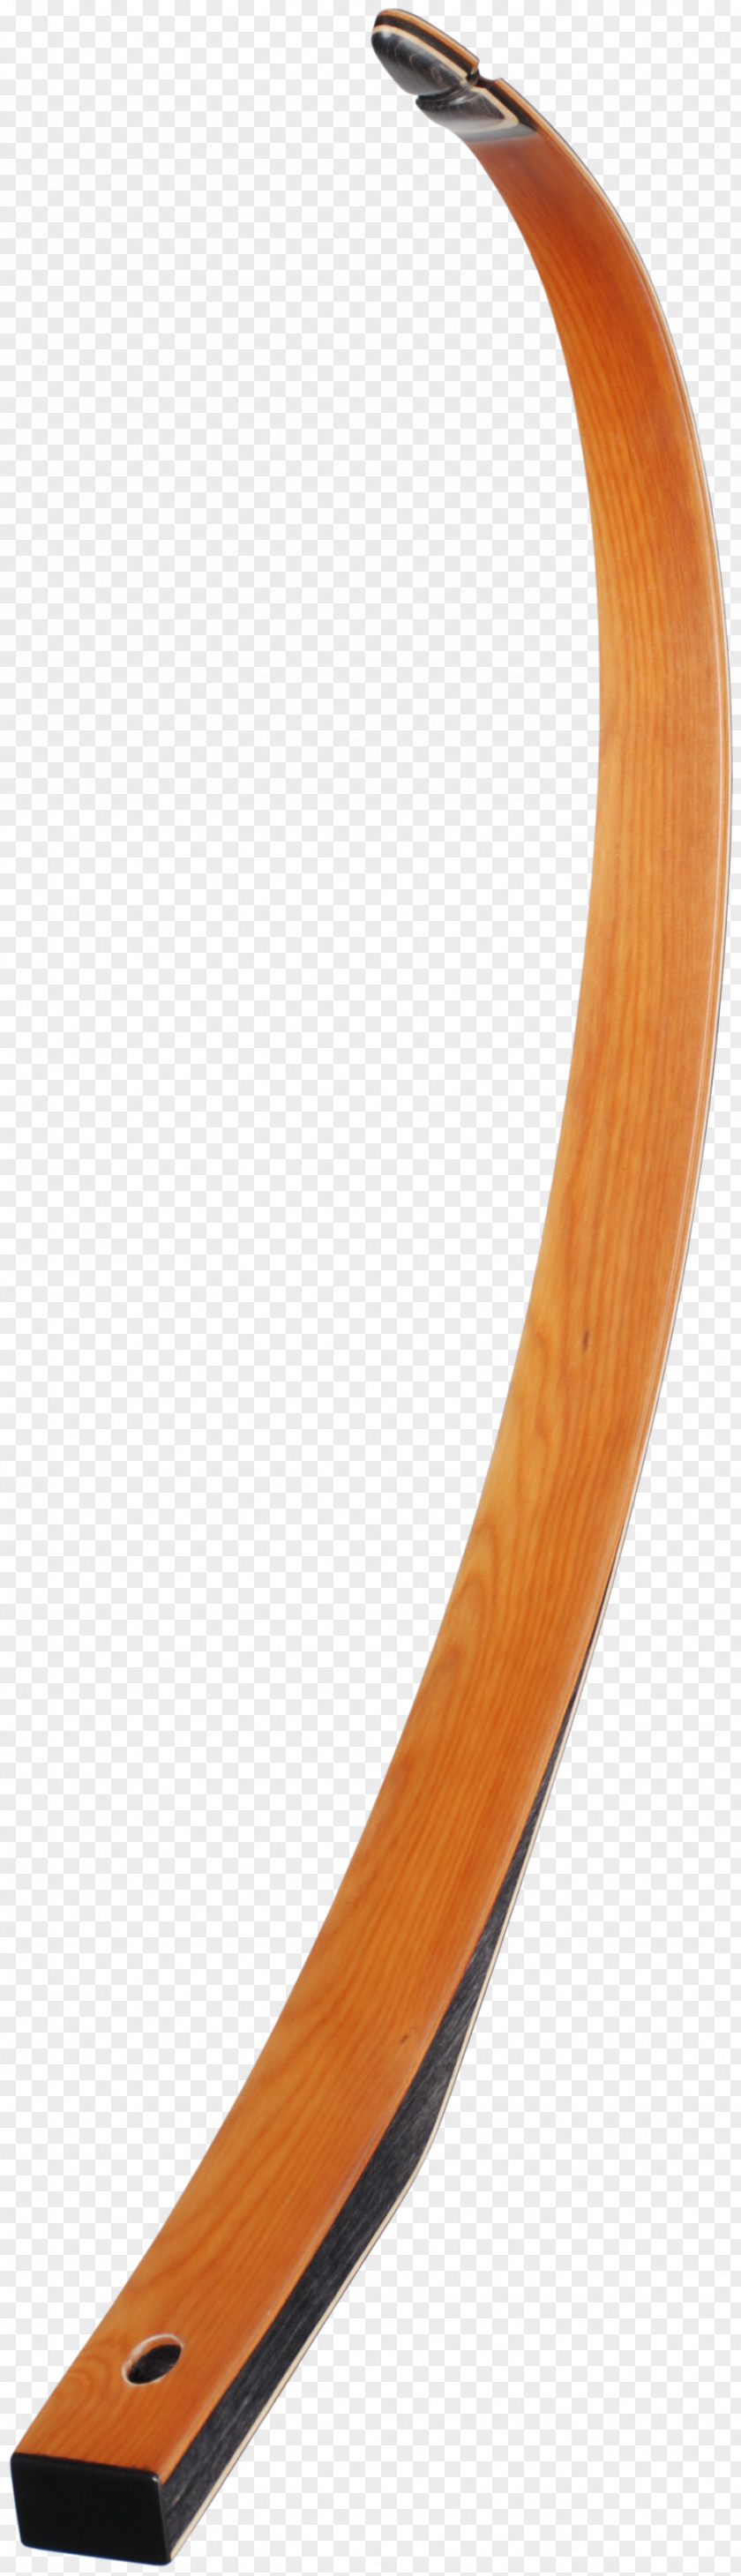 Wood English Longbow Yew Bow And Arrow PNG